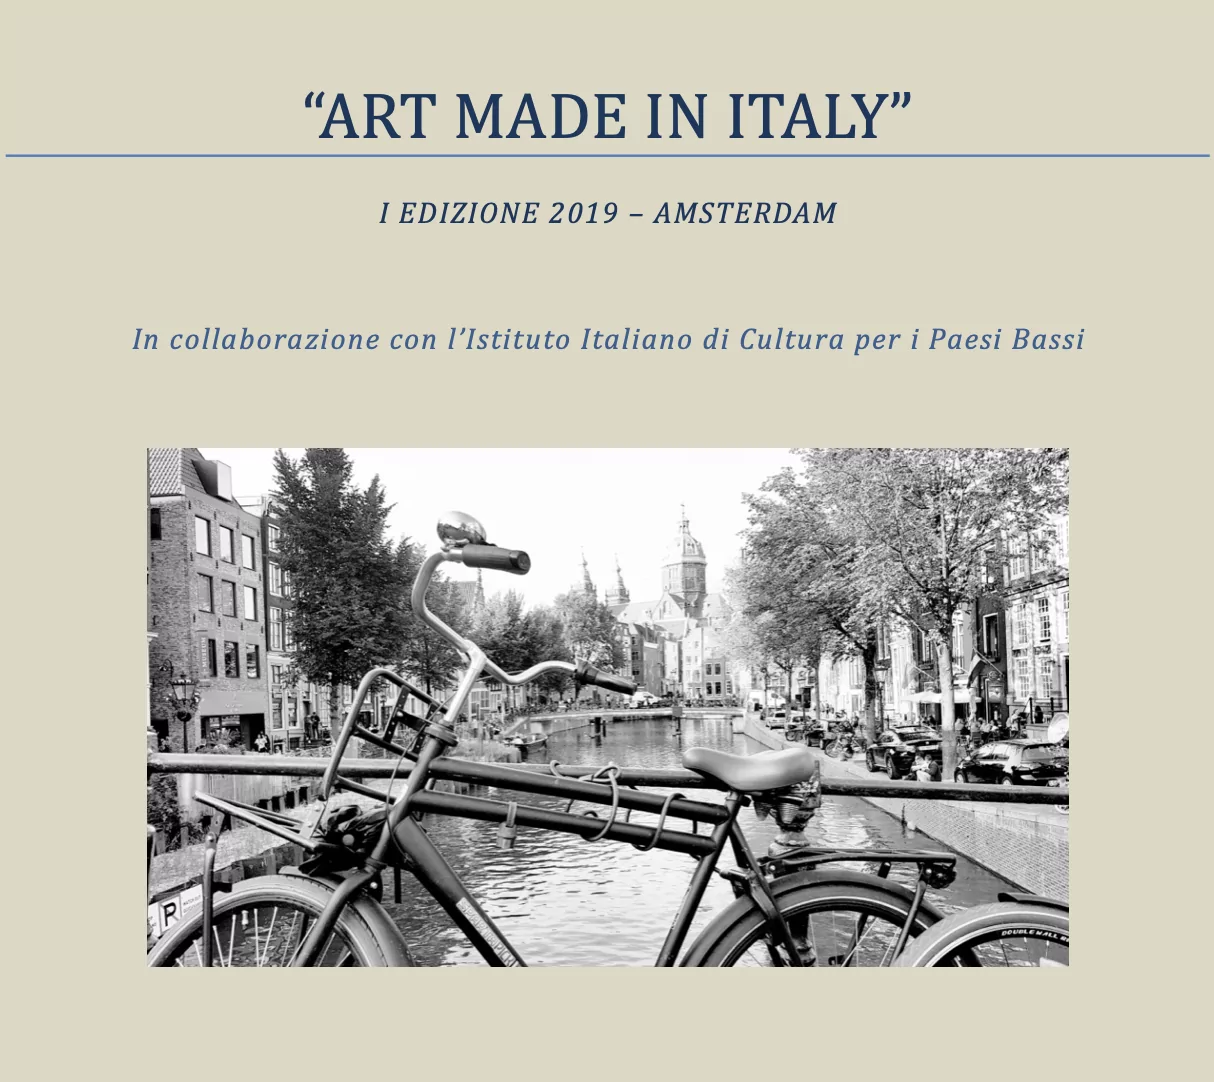 “ART MADE IN ITALY” - Amsterdam